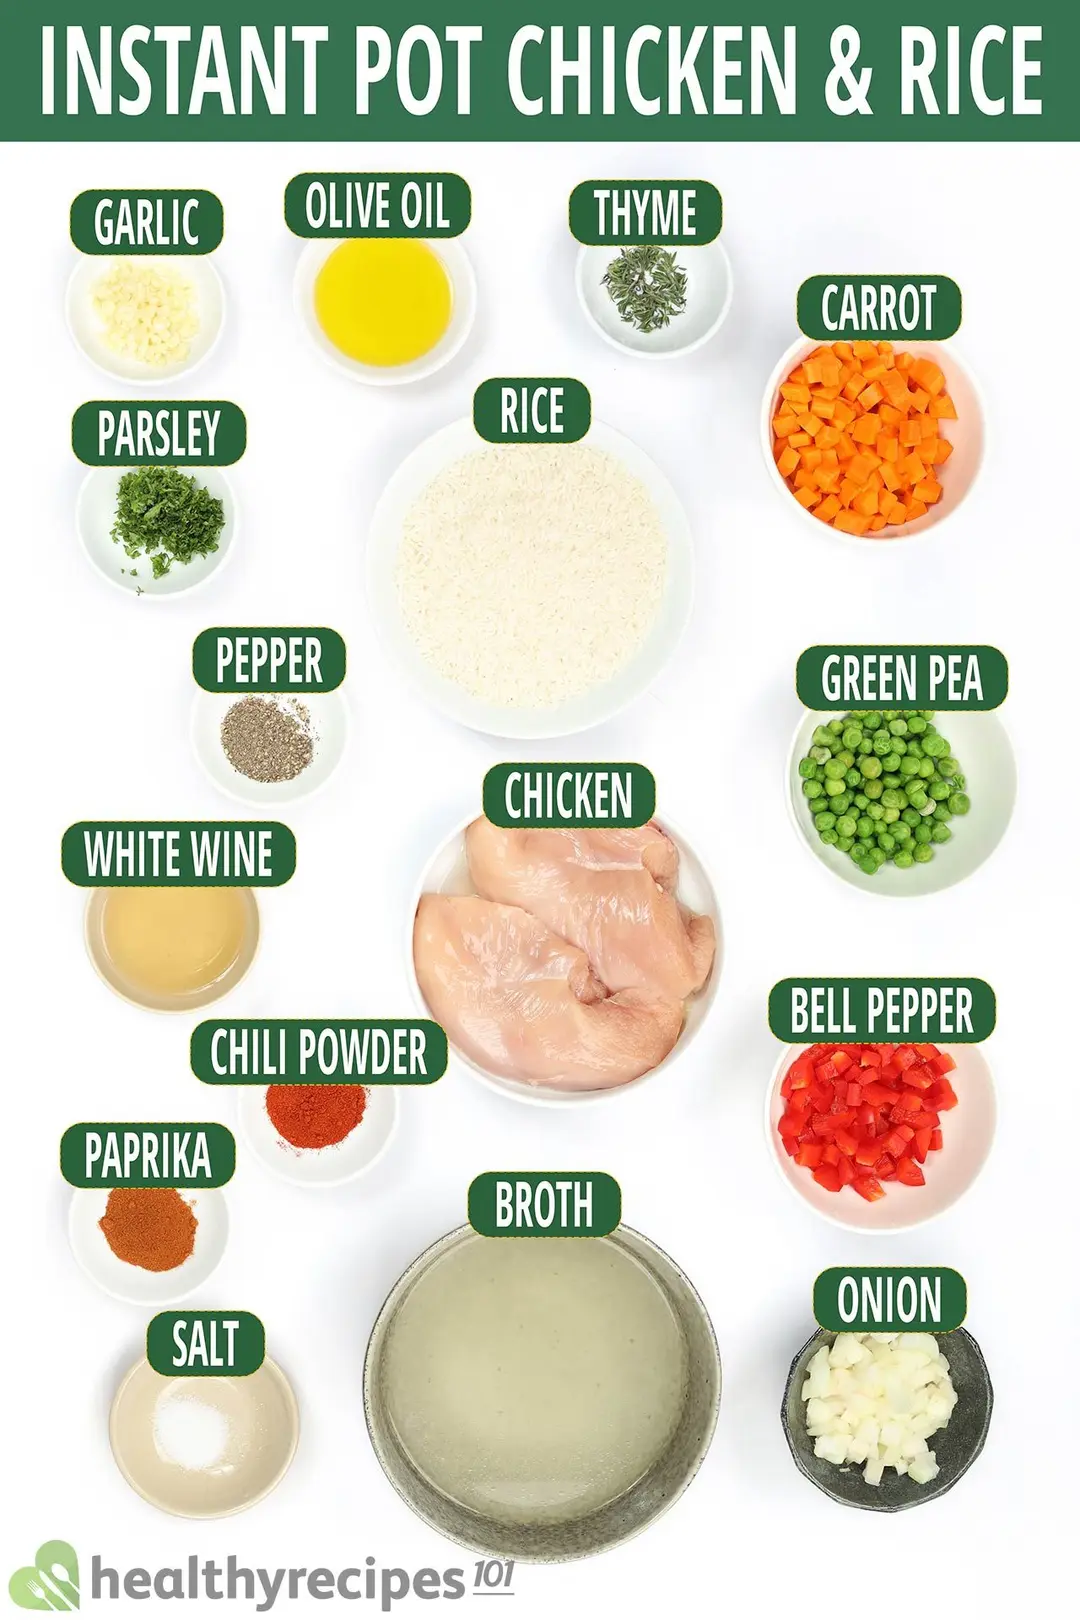 Ingredients for instant pot chicken and rice, including raw chicken breasts, white rice, diced carrots, diced bell peppers, diced onion, green peas, and spices